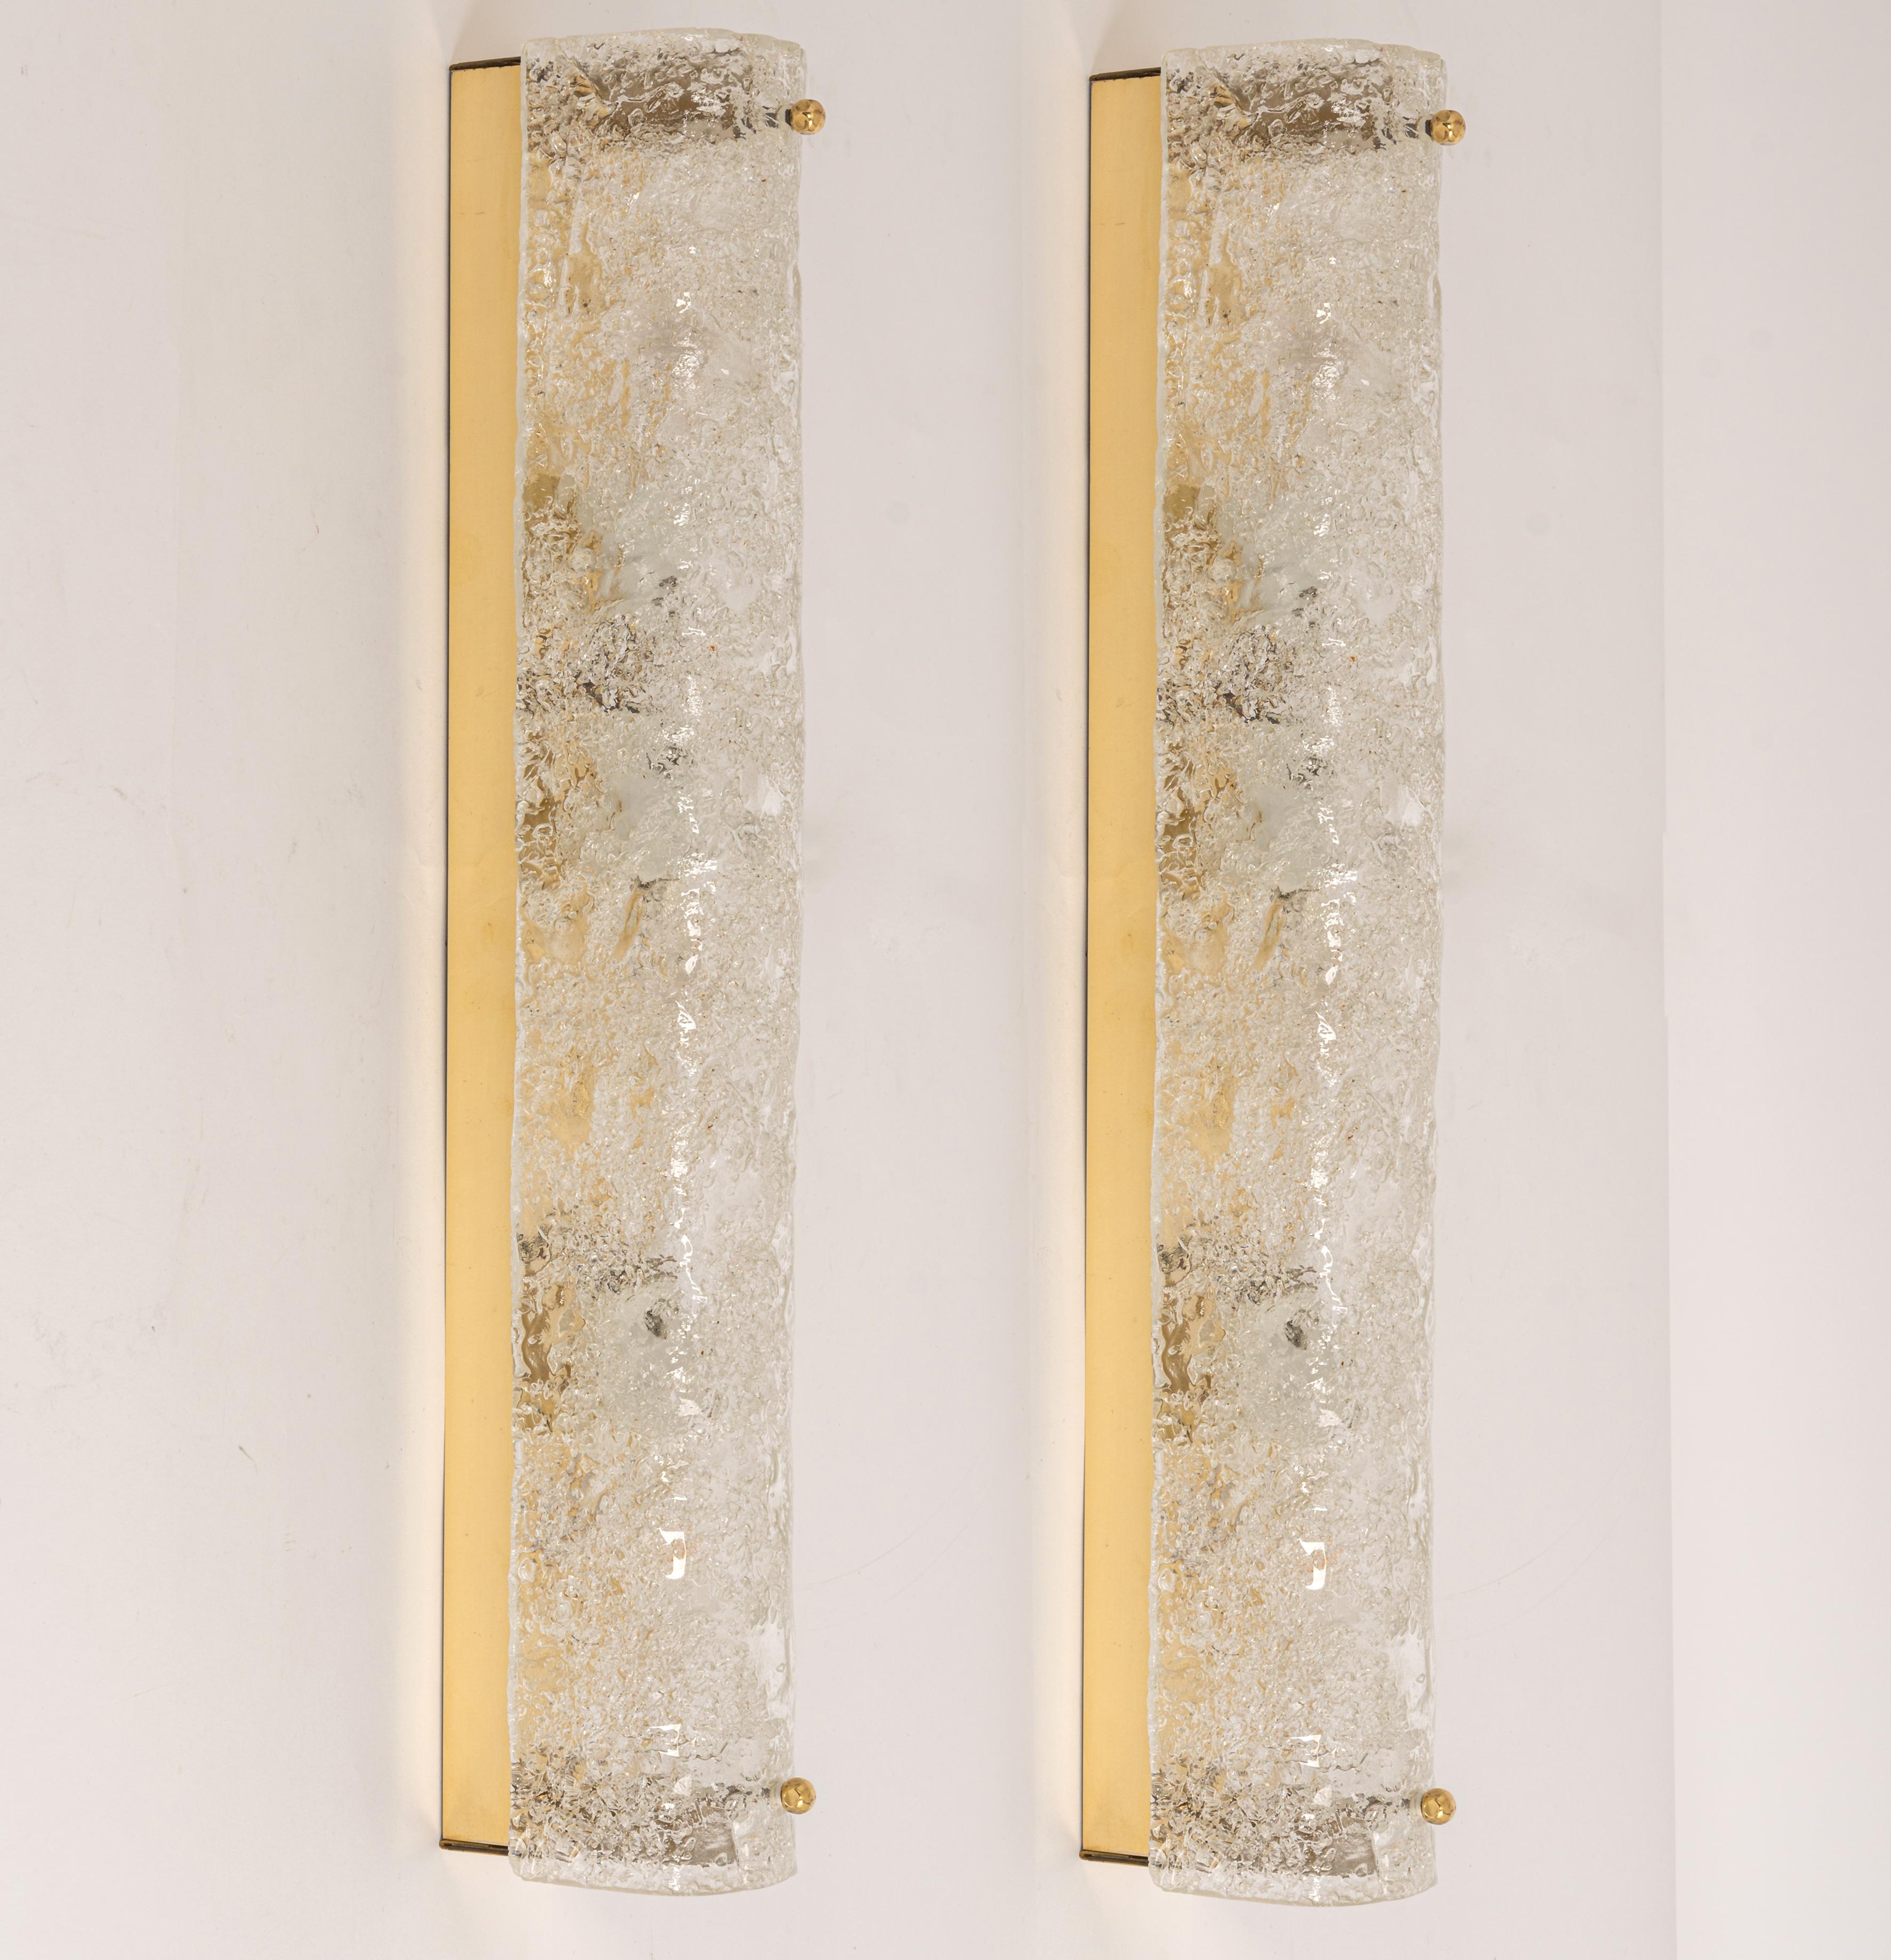 Pair of large handcrafted Murano glass on a brass base sconces by Hillebrand, Germany, circa 1960s.

It consists of textured quality clear crystal tubular shade simulating ice on a Brass frame.
The design allows this light to be placed either